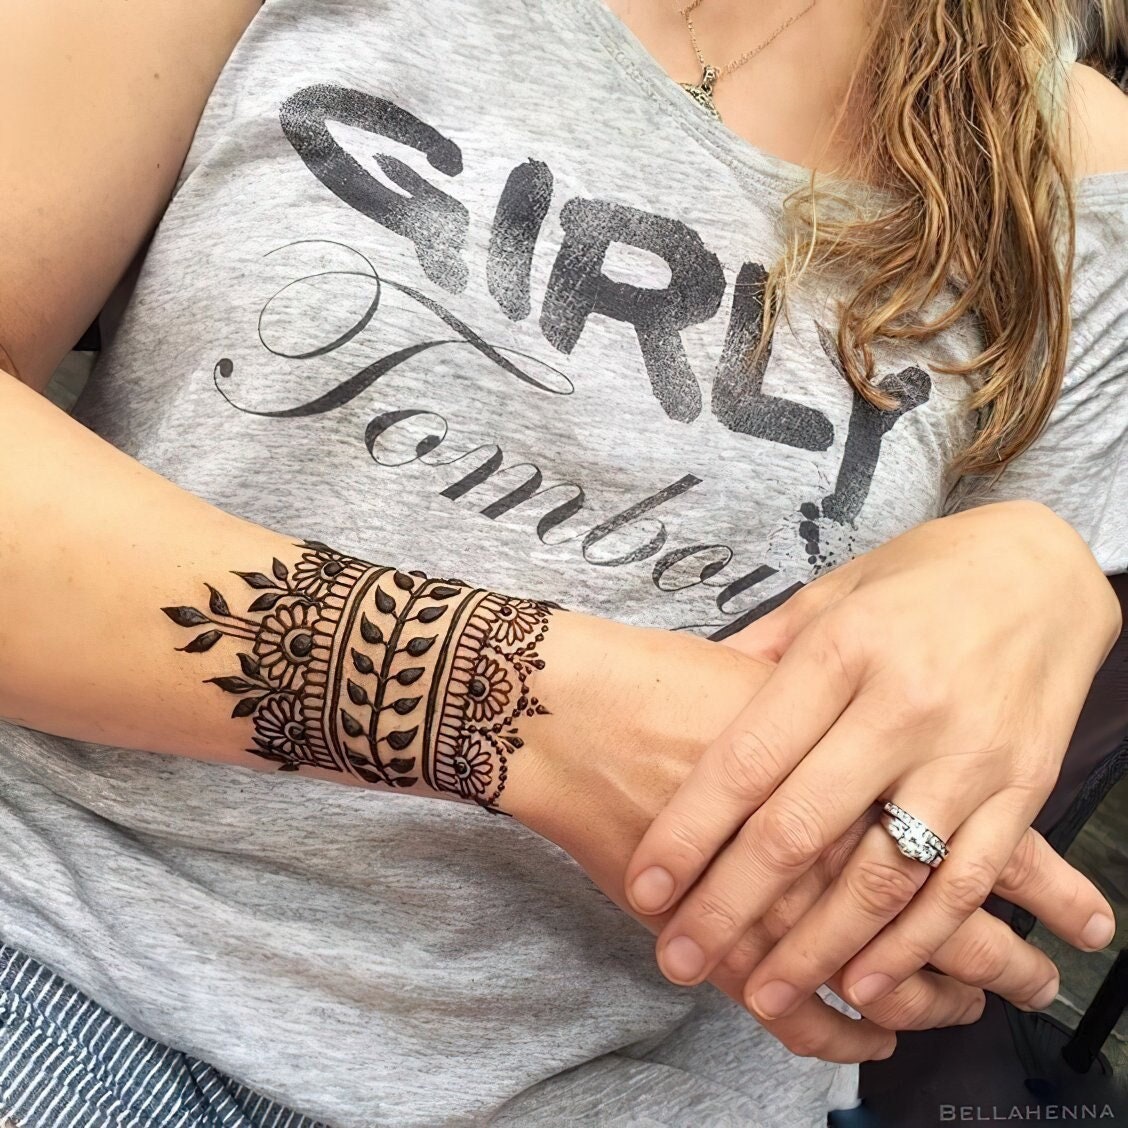 Tribal Tattoo Shop - Power ring tattoos on the forearm. A simple yet subtle  sign of attitude and agression. #tribal #tribalmangaluru #tribalmangalore # tattoo #inked #ink #fight #boxing #power #igers #potd #ootd #forearm #